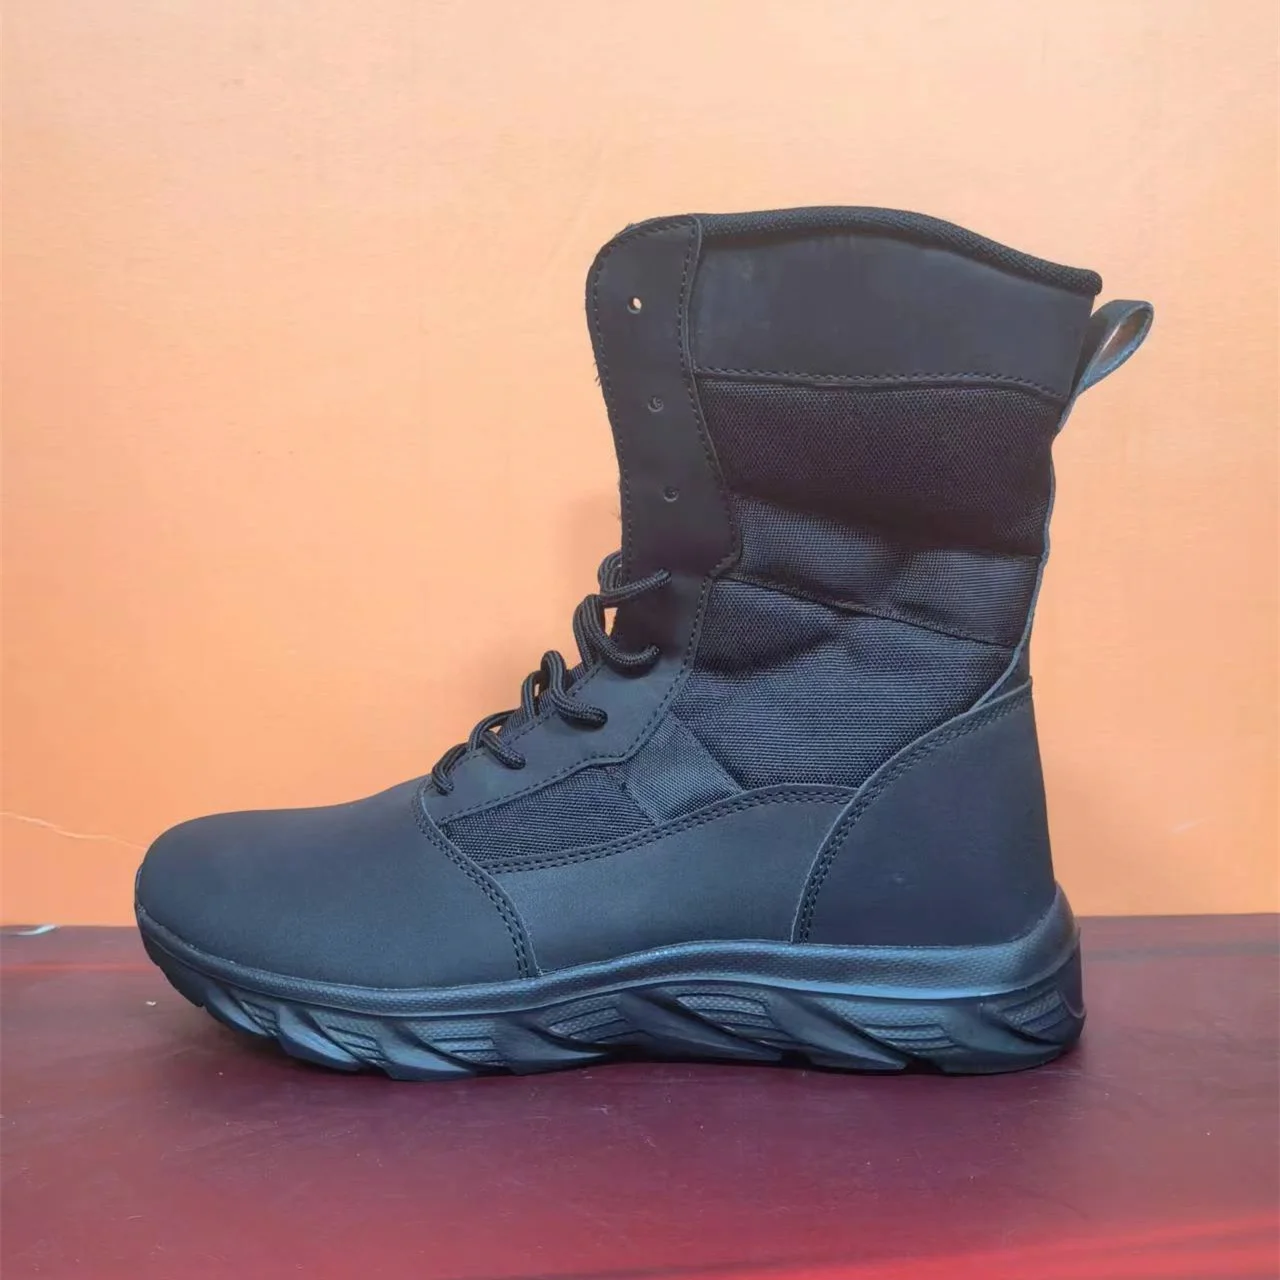 Sport outdoor boots size 454,647 hiking boots men's and women's boots